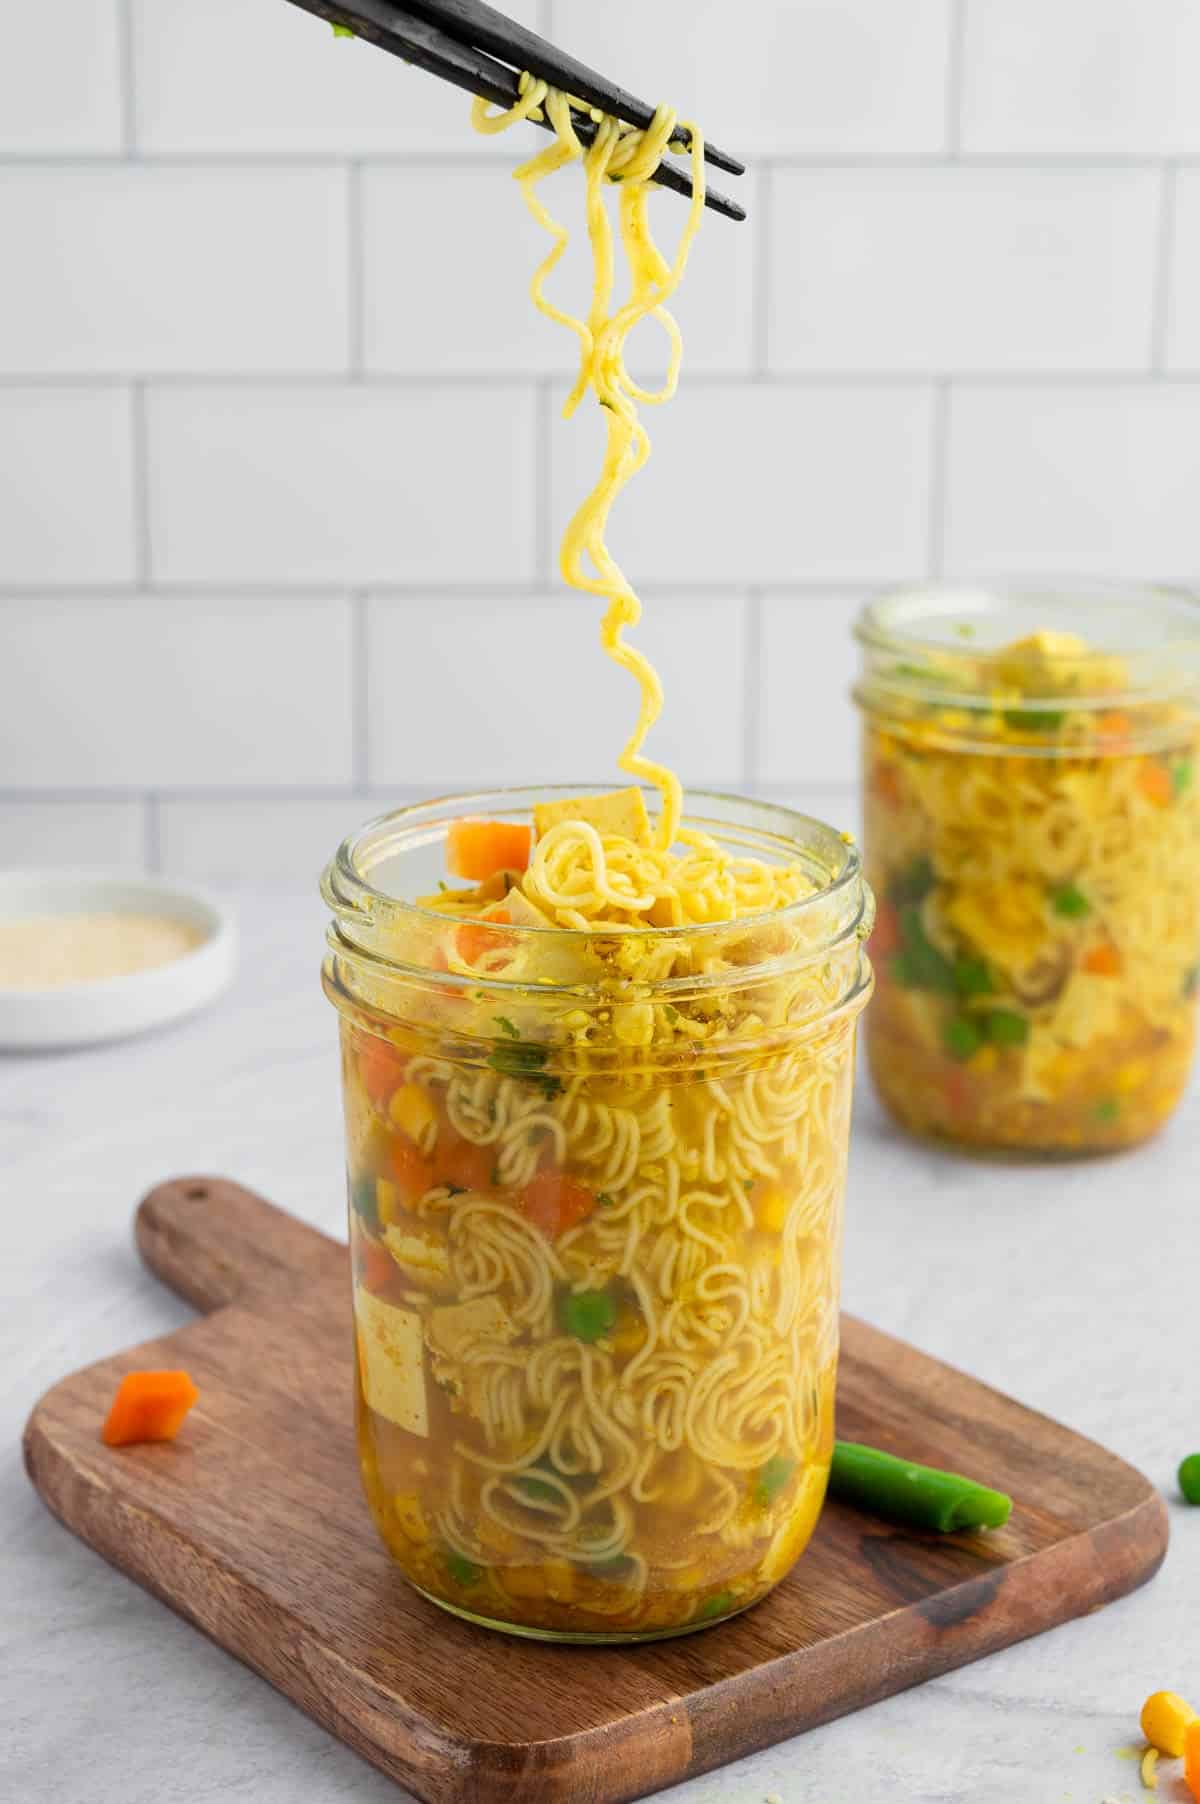 Long noodles being pulled by chopsticks out of a jar of broth and veggies.